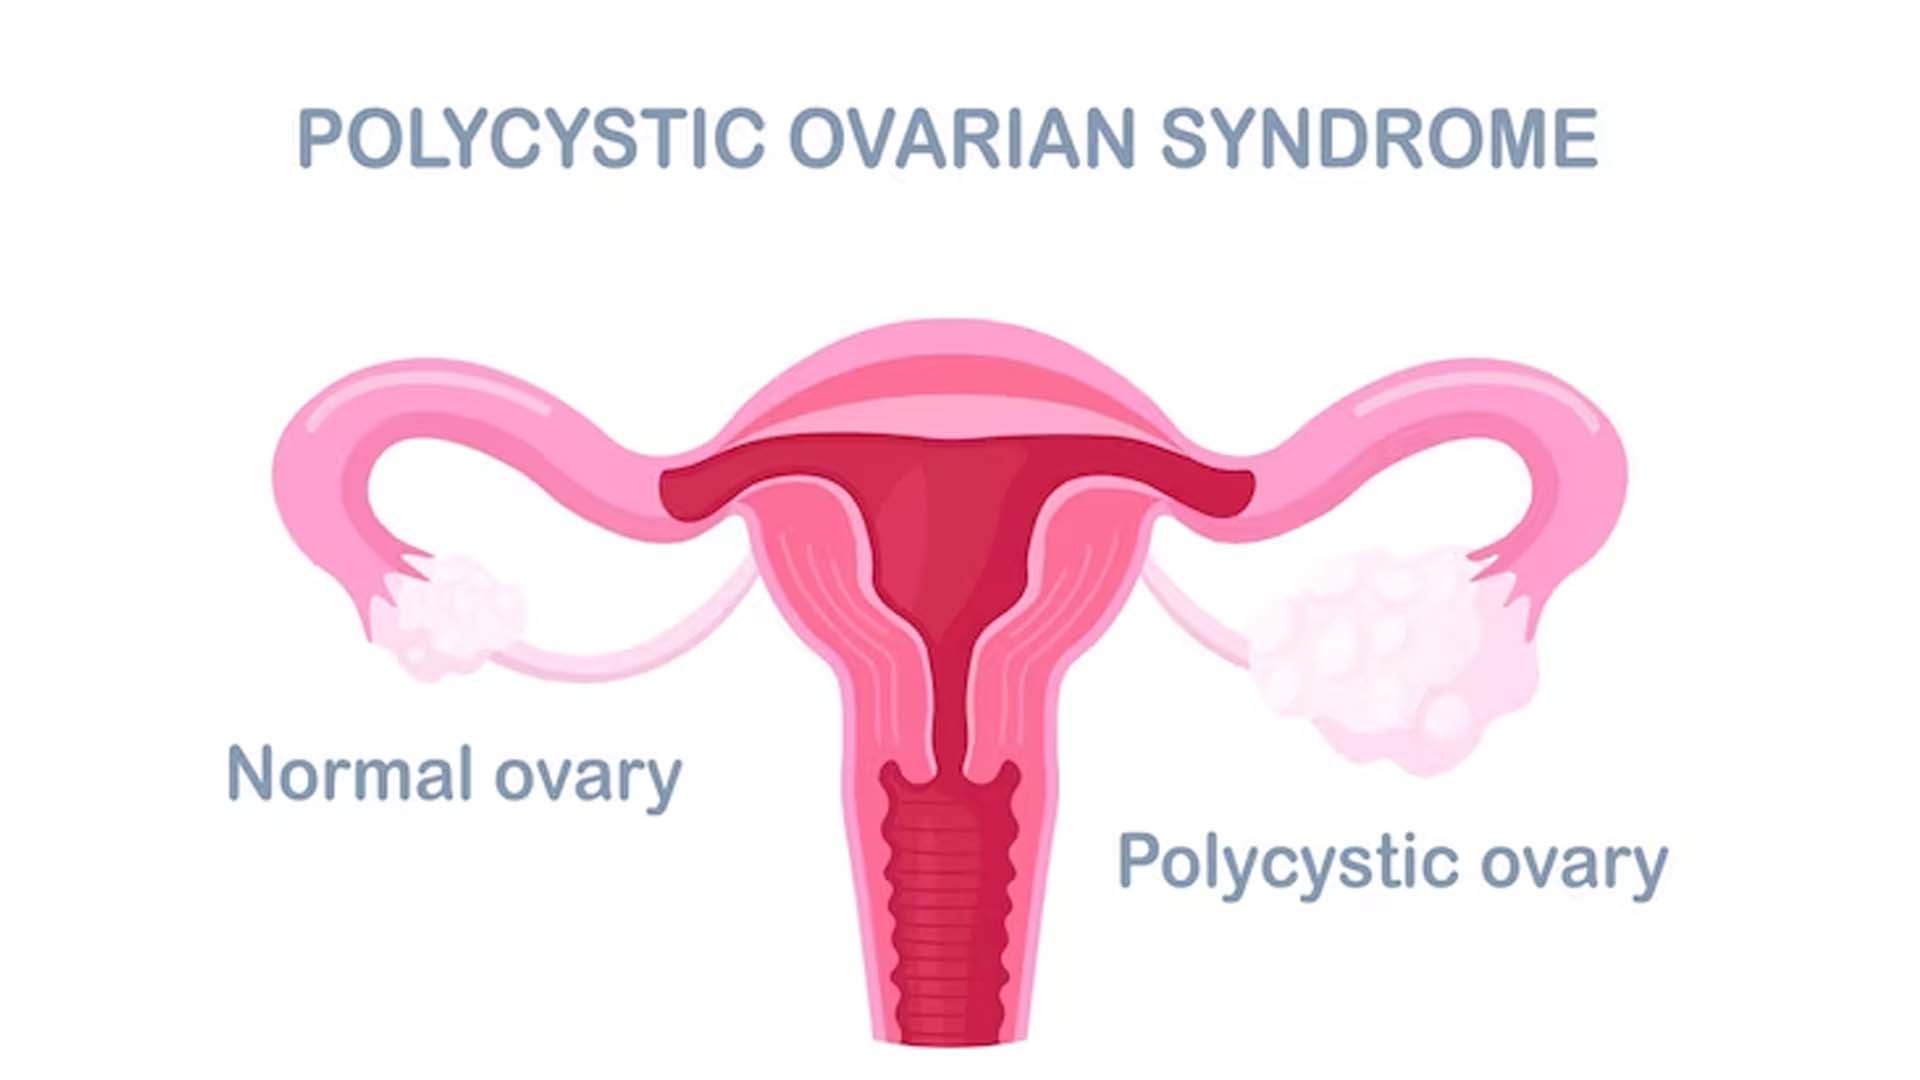 Polycystic ovary syndrome (PCOS)